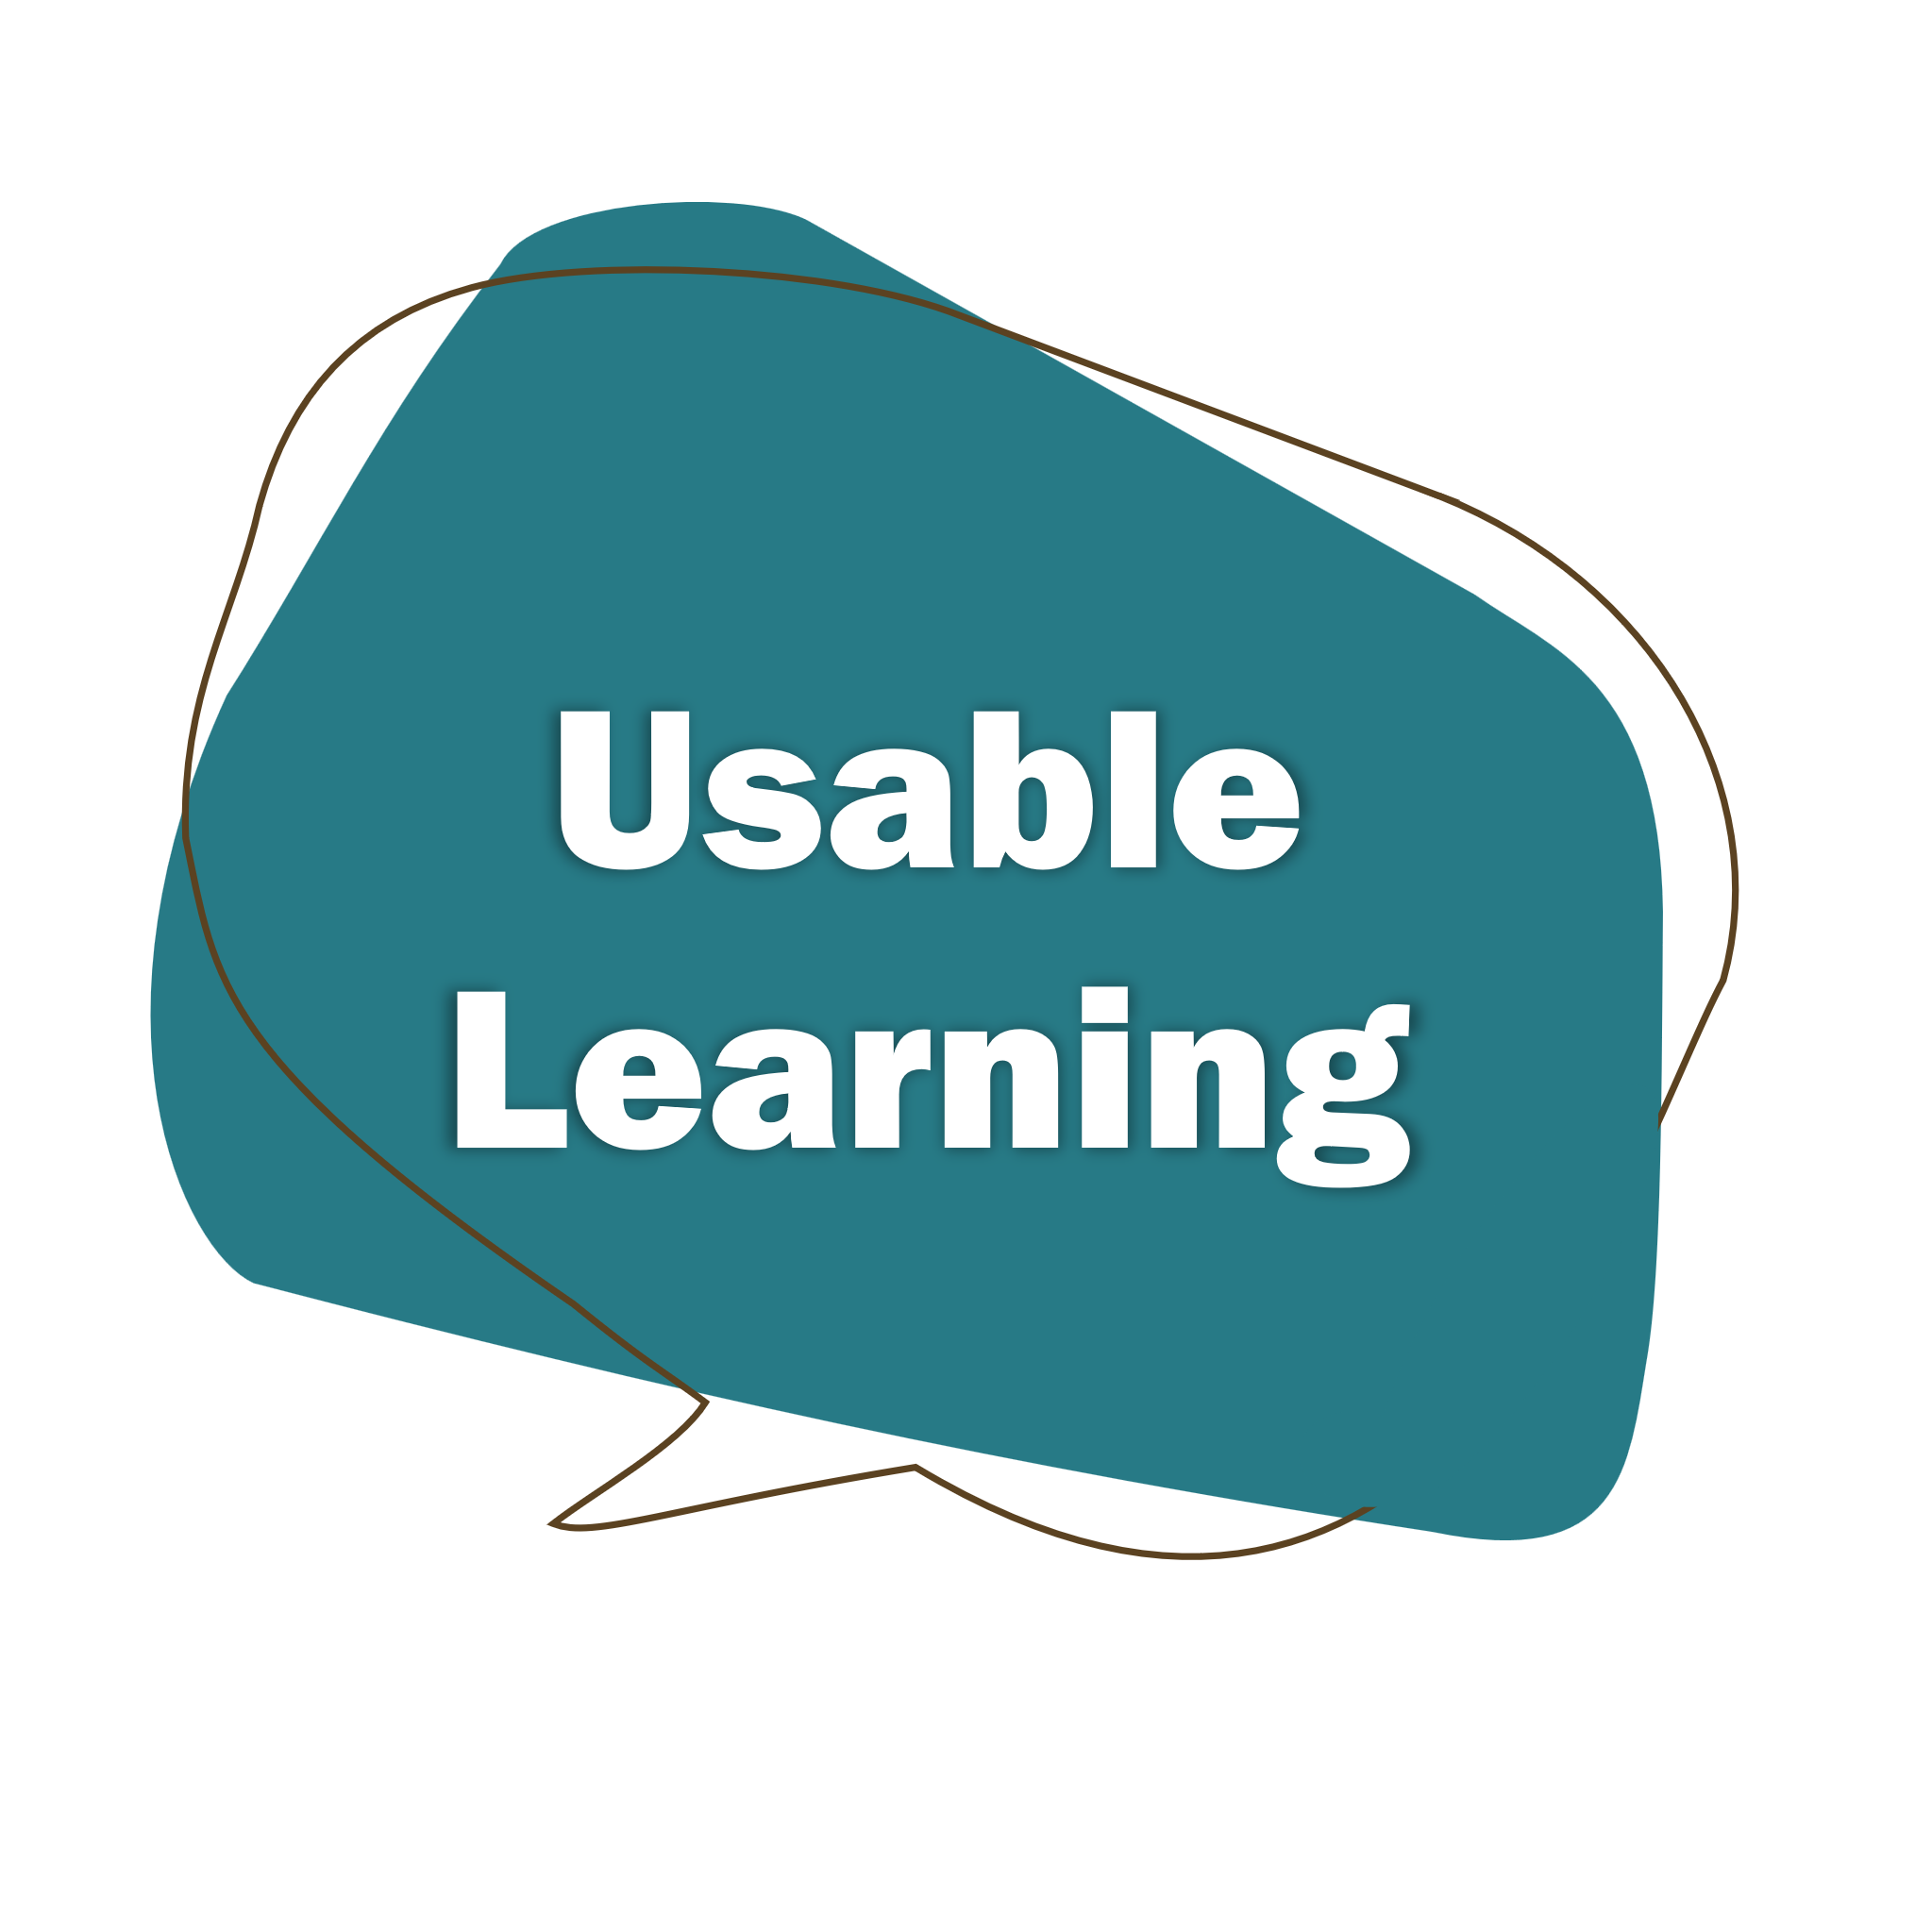 Usable Learning